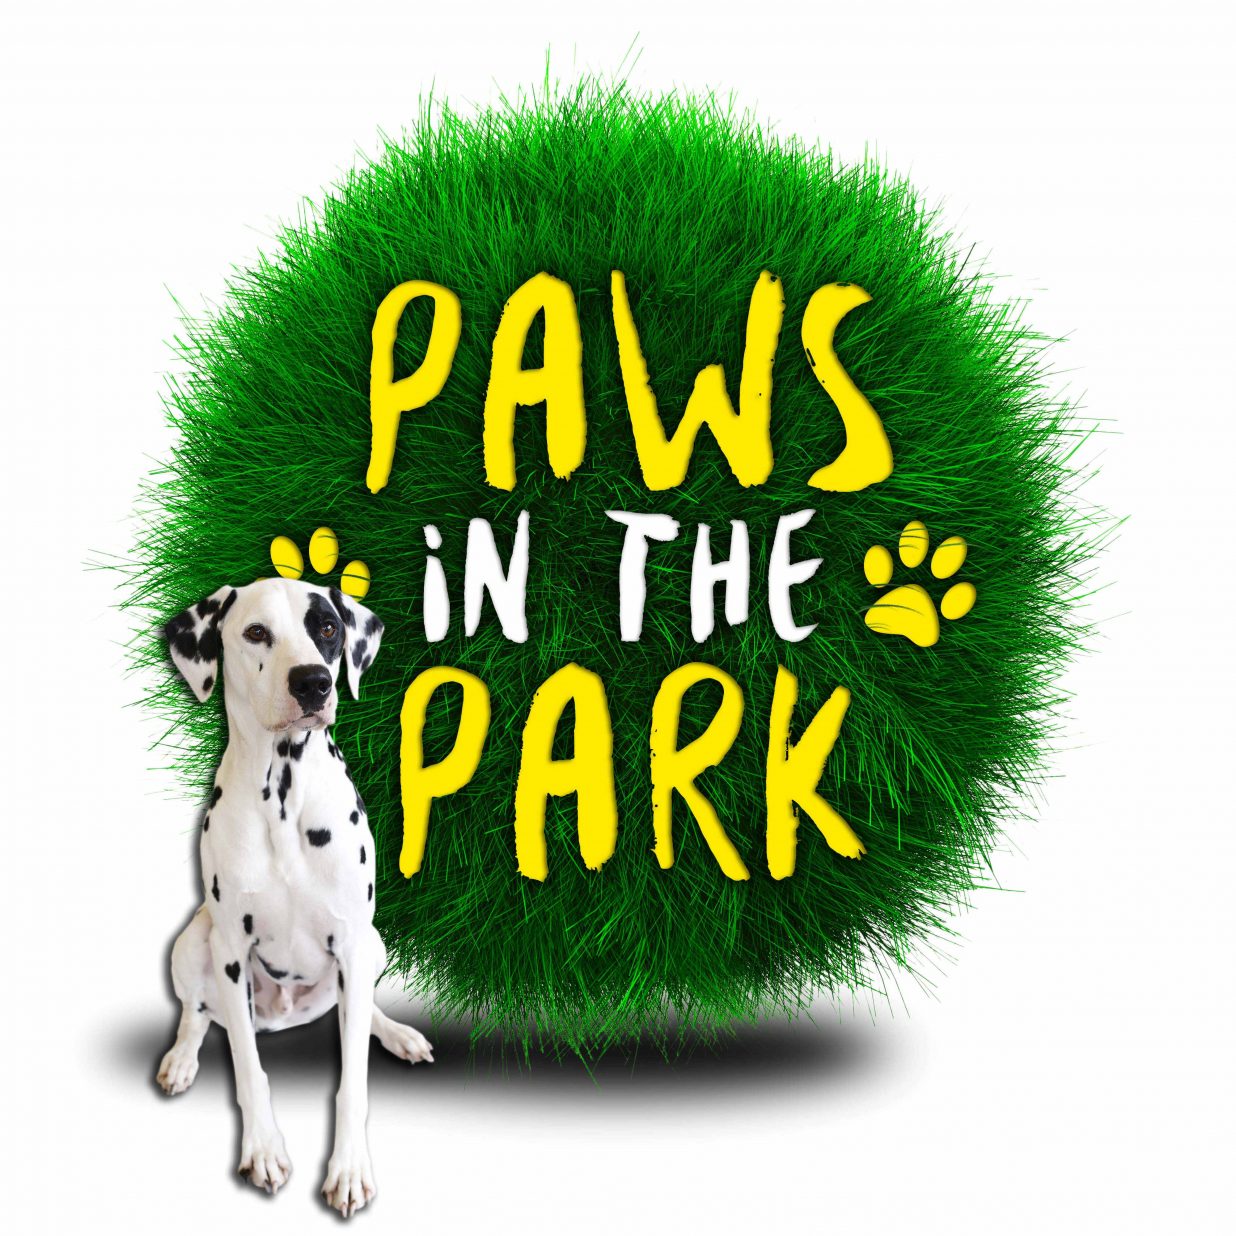 Louie steals the crown to become the face of Paws in the Park